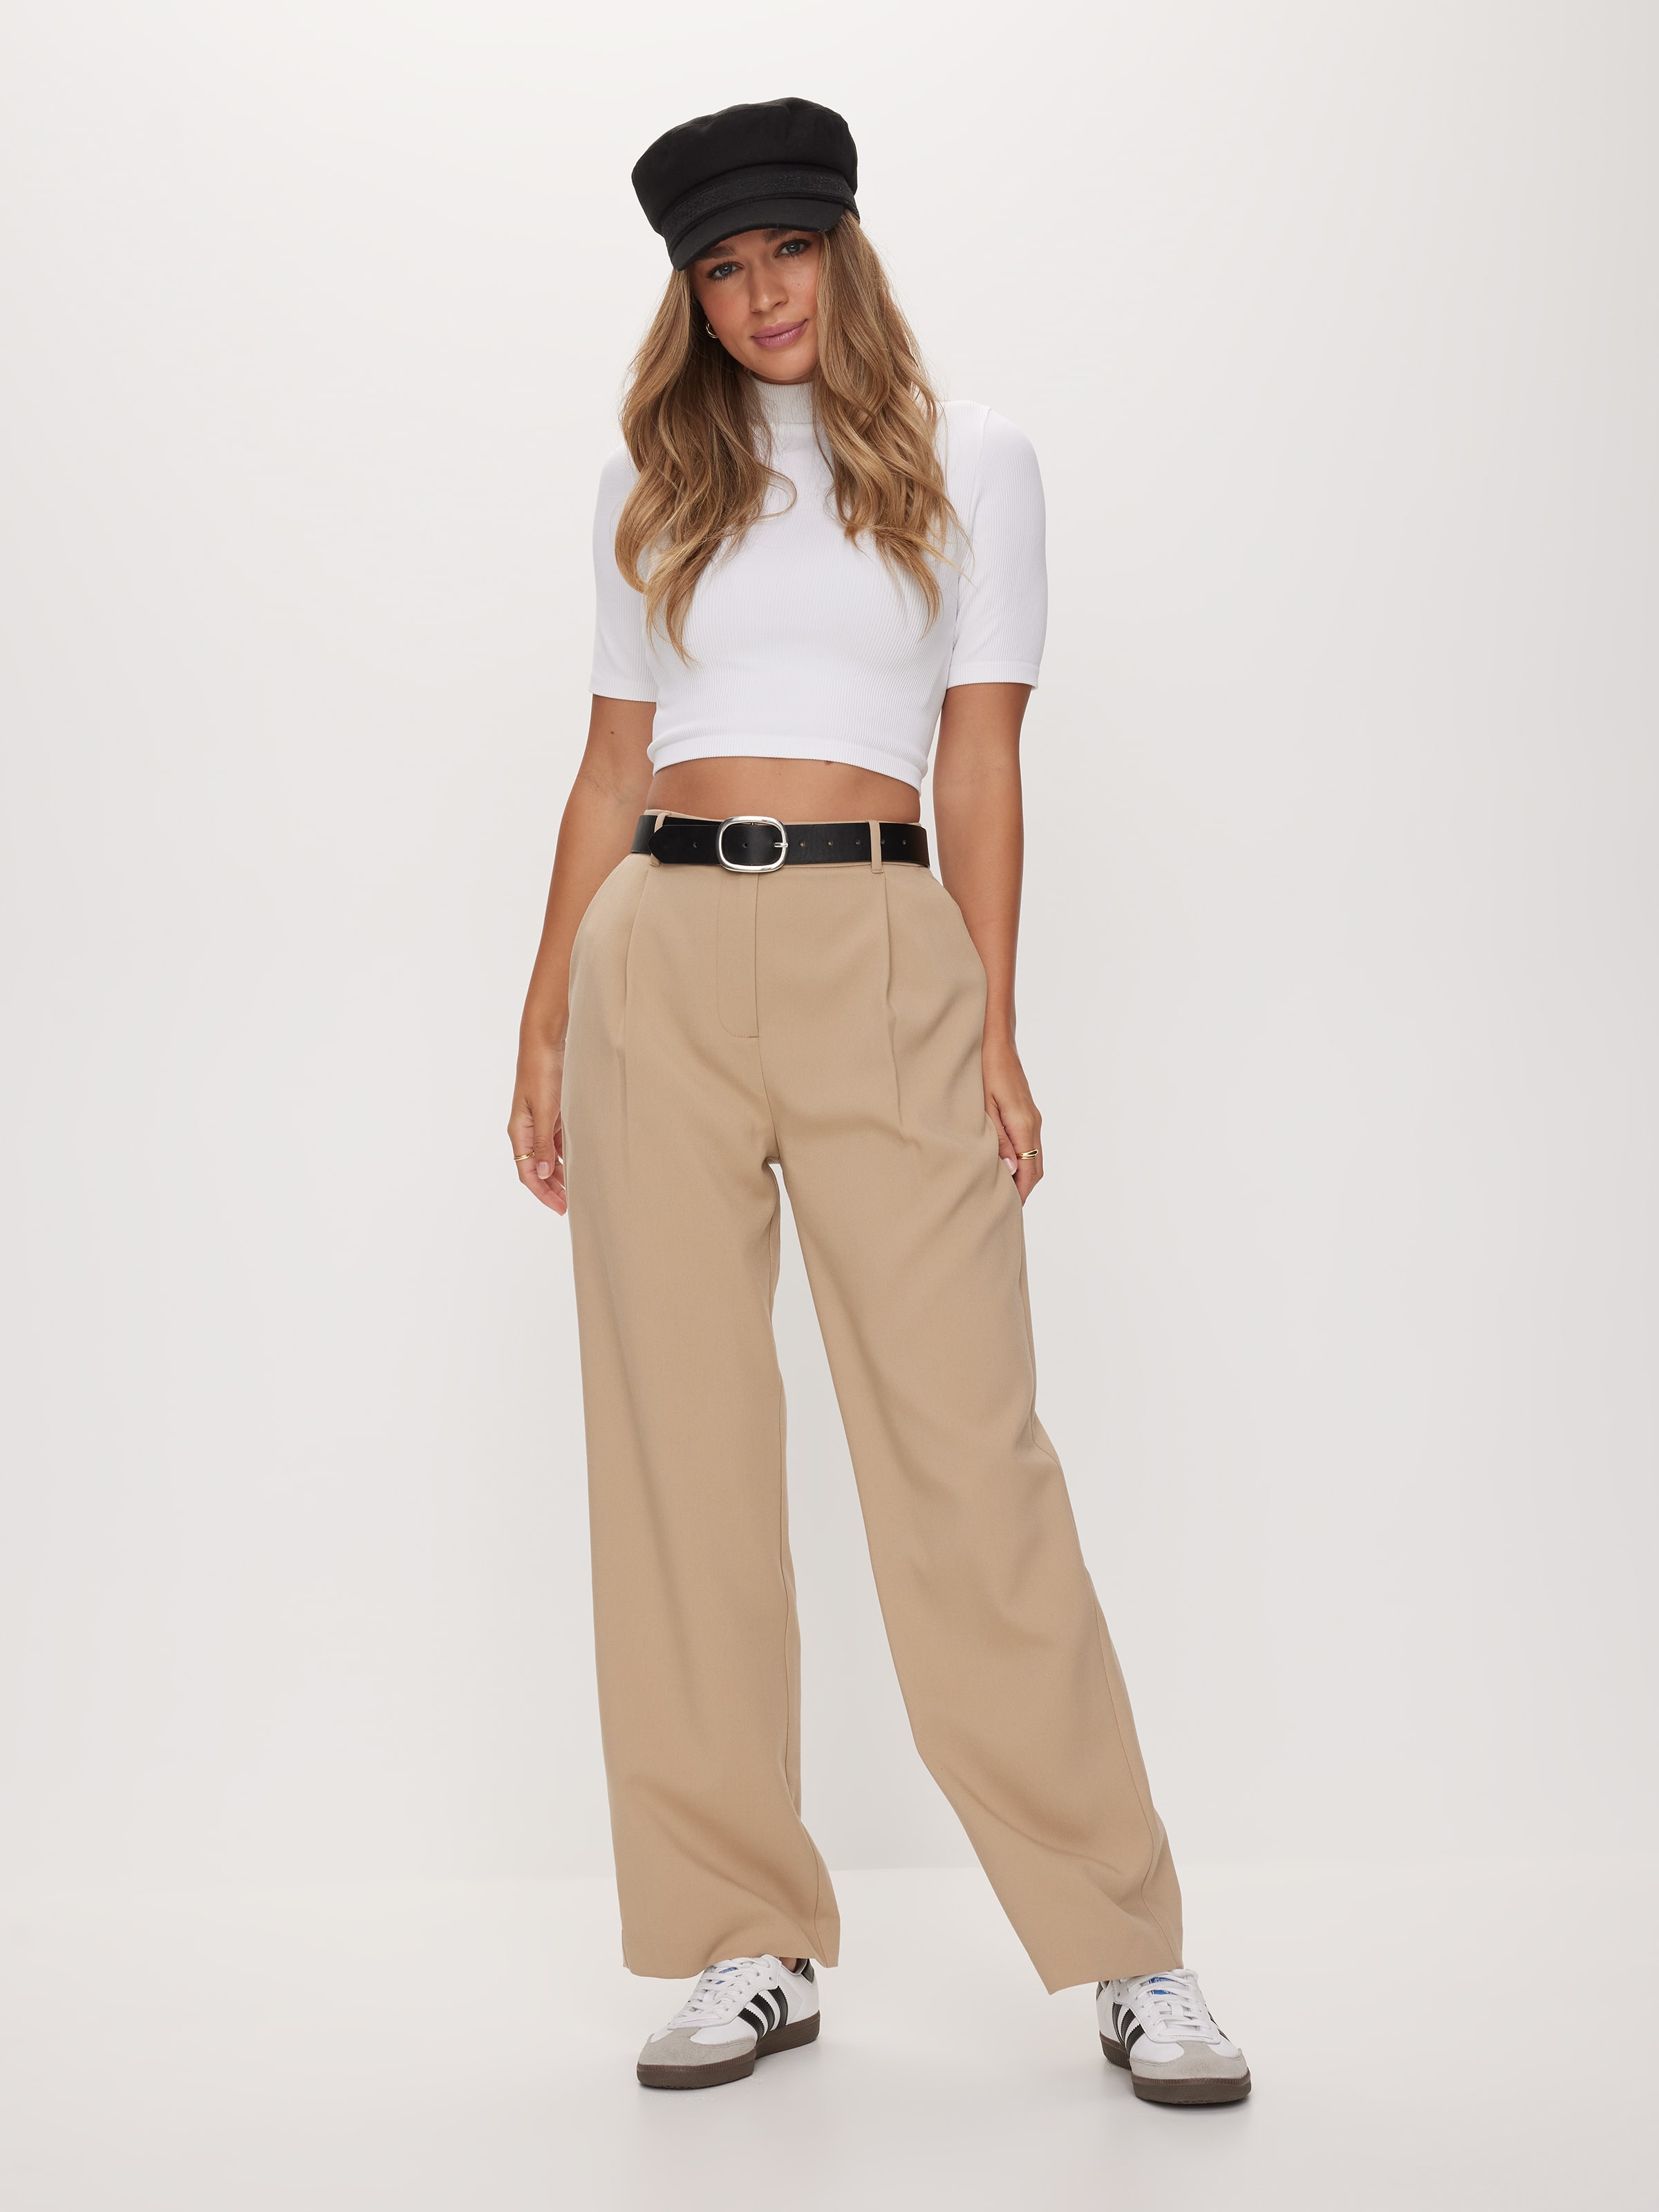 Dark Beige Relaxed Fit Pants for Women, High Waist Pants for Women, Formal  Pants for Women, Office Wear Womens, Business Casual Pants Womens -   Norway